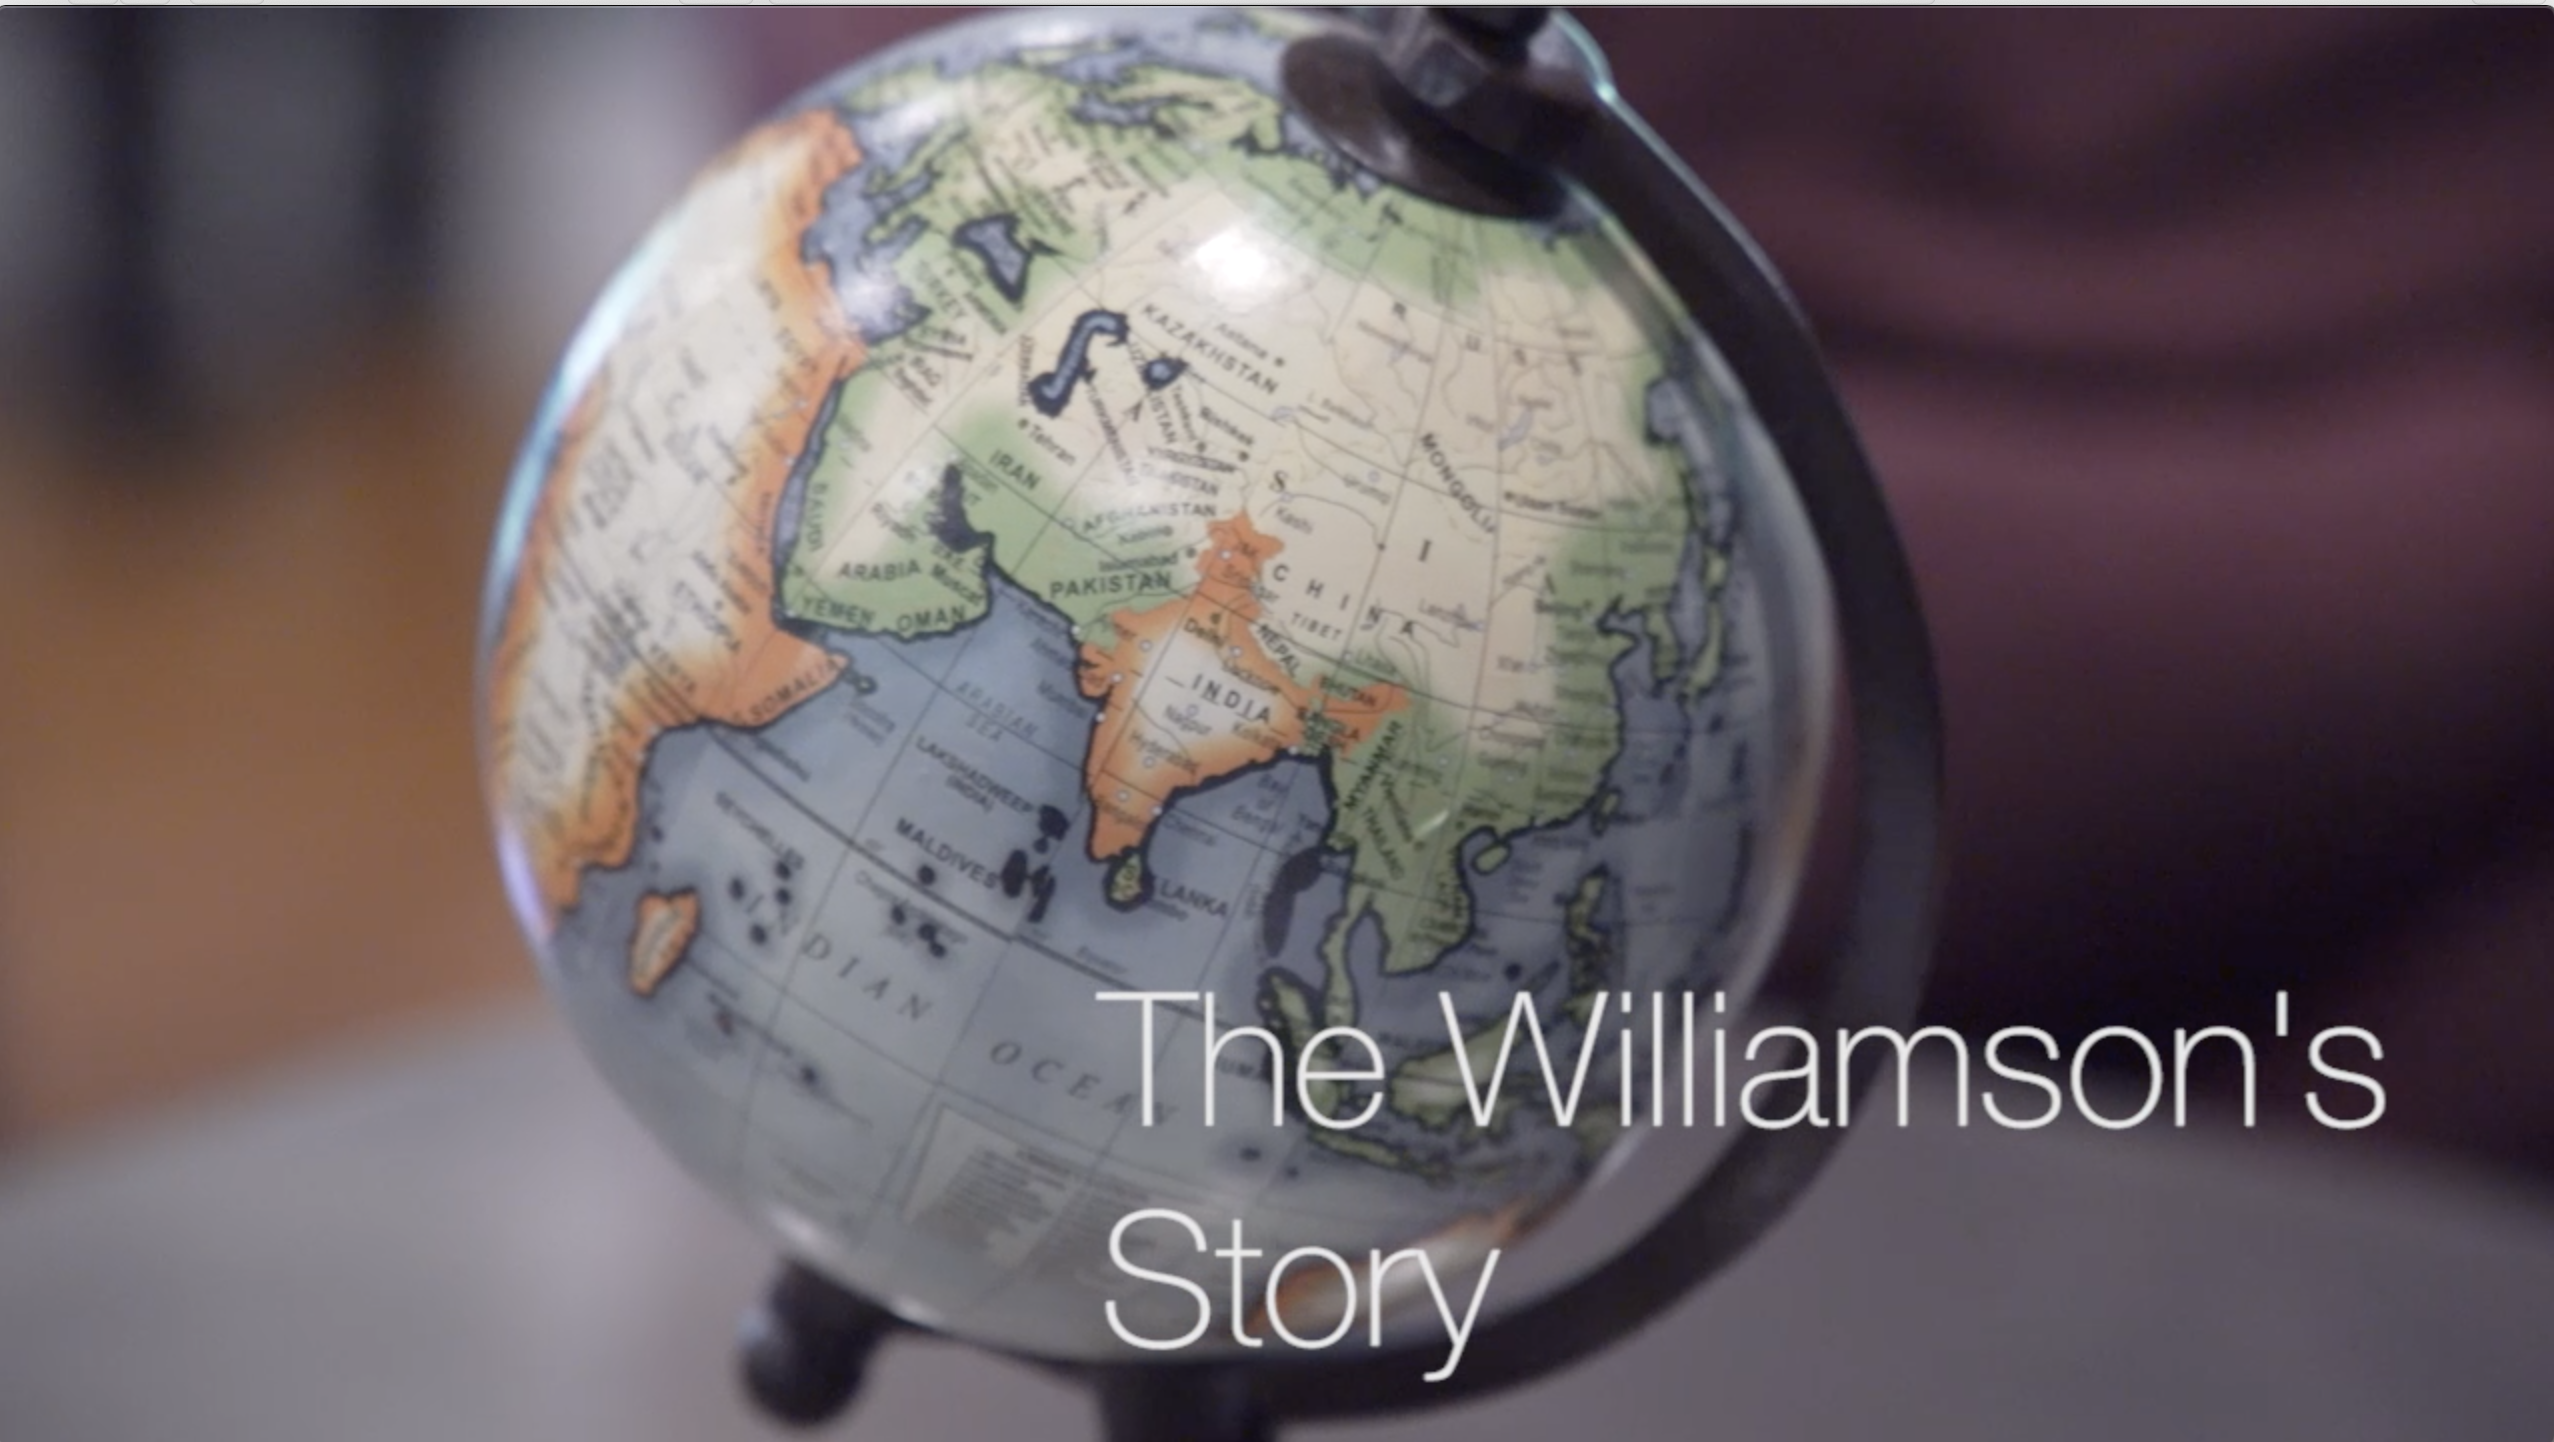 The Williamson's Story